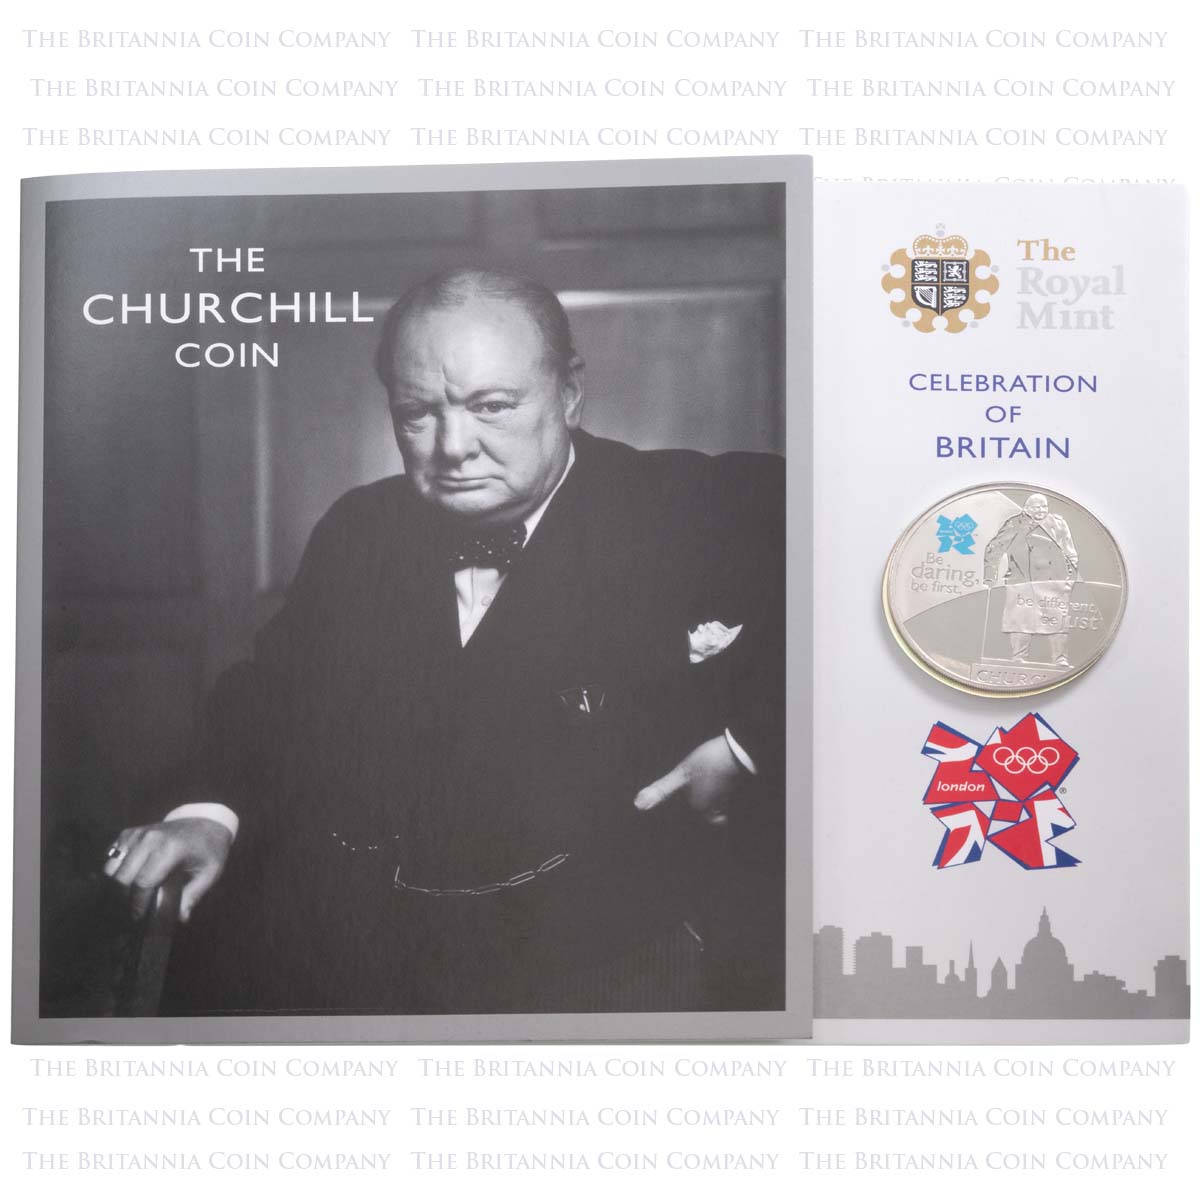 LUKCBWCB 2010 London Olympic Games Sir Winston Churchill Five Pound Crown Proof Coin In Folder